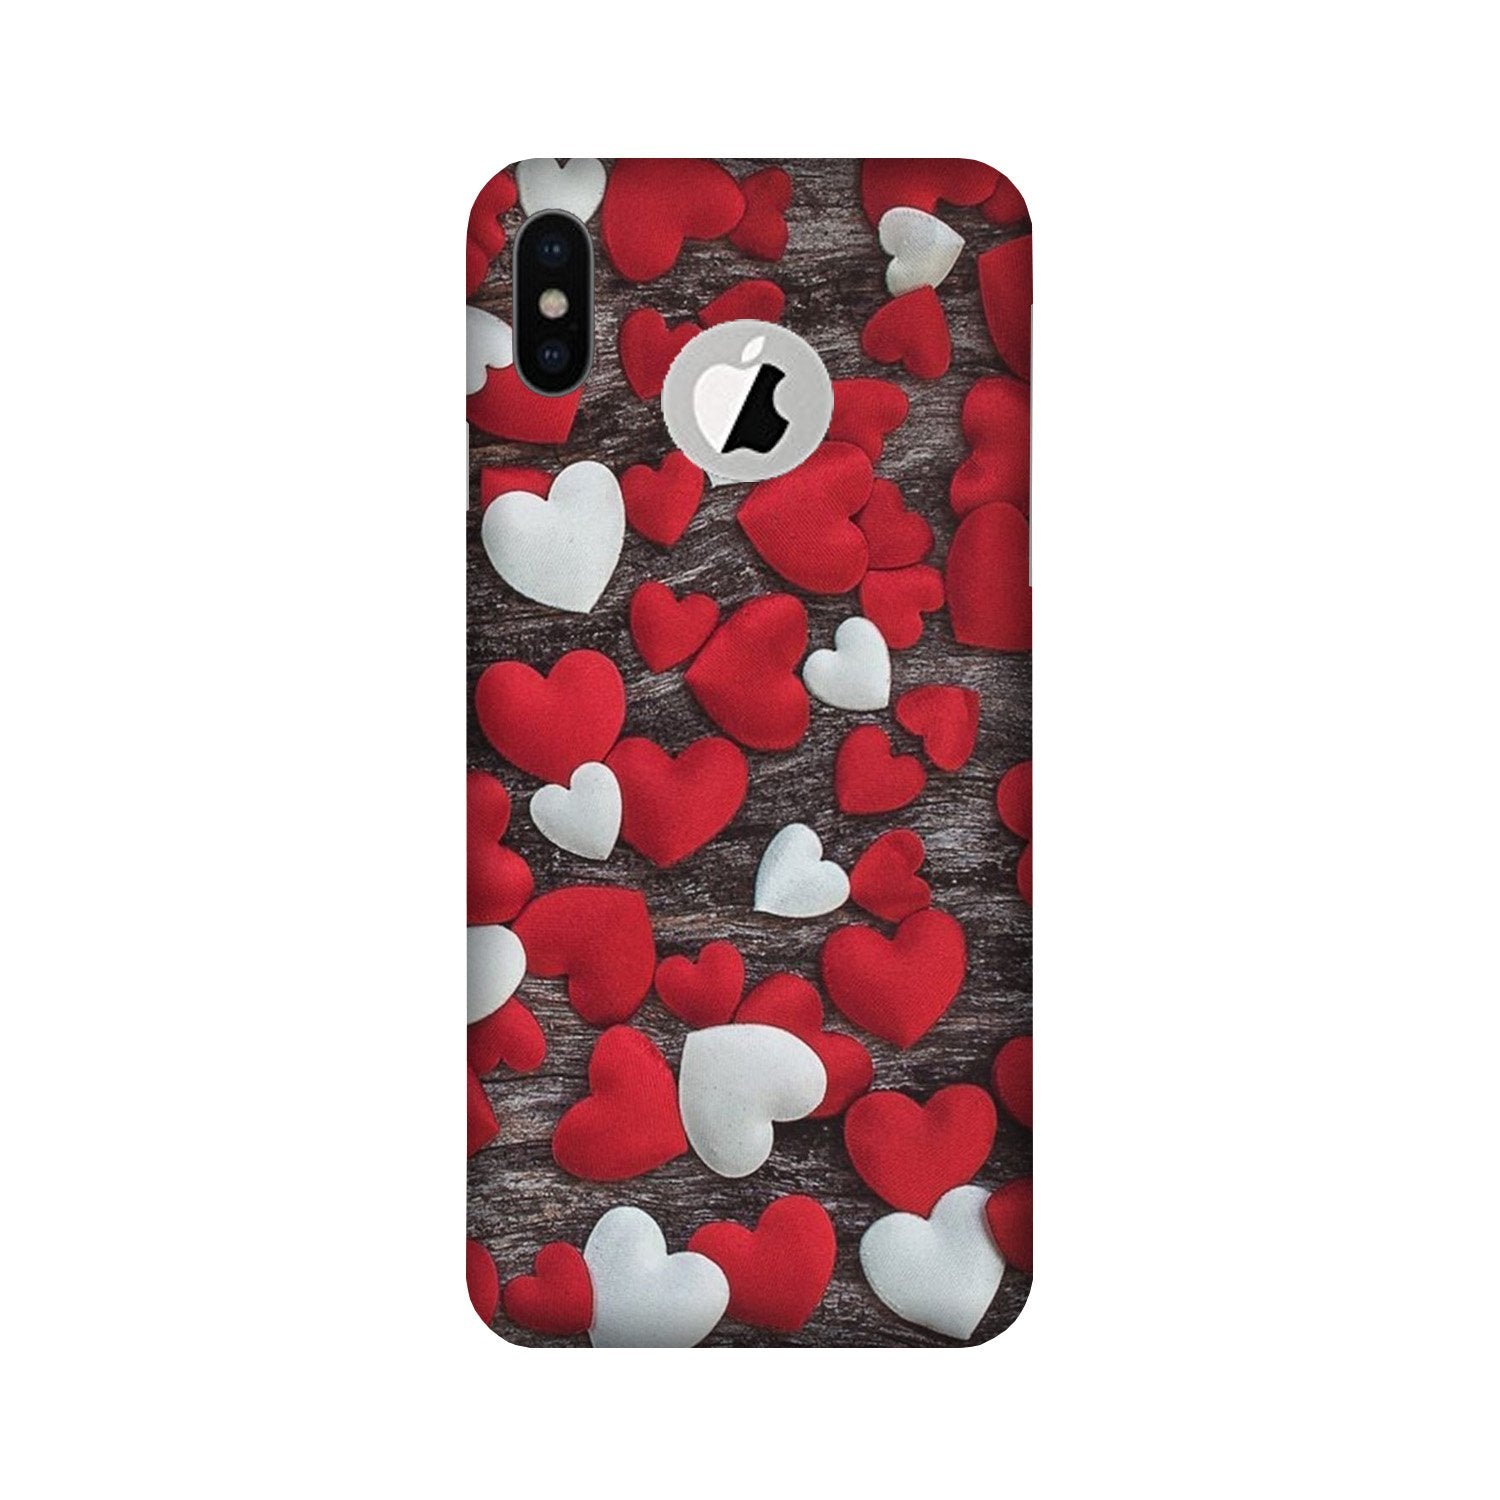 Red White Hearts Case for iPhone Xs logo cut (Design - 105)